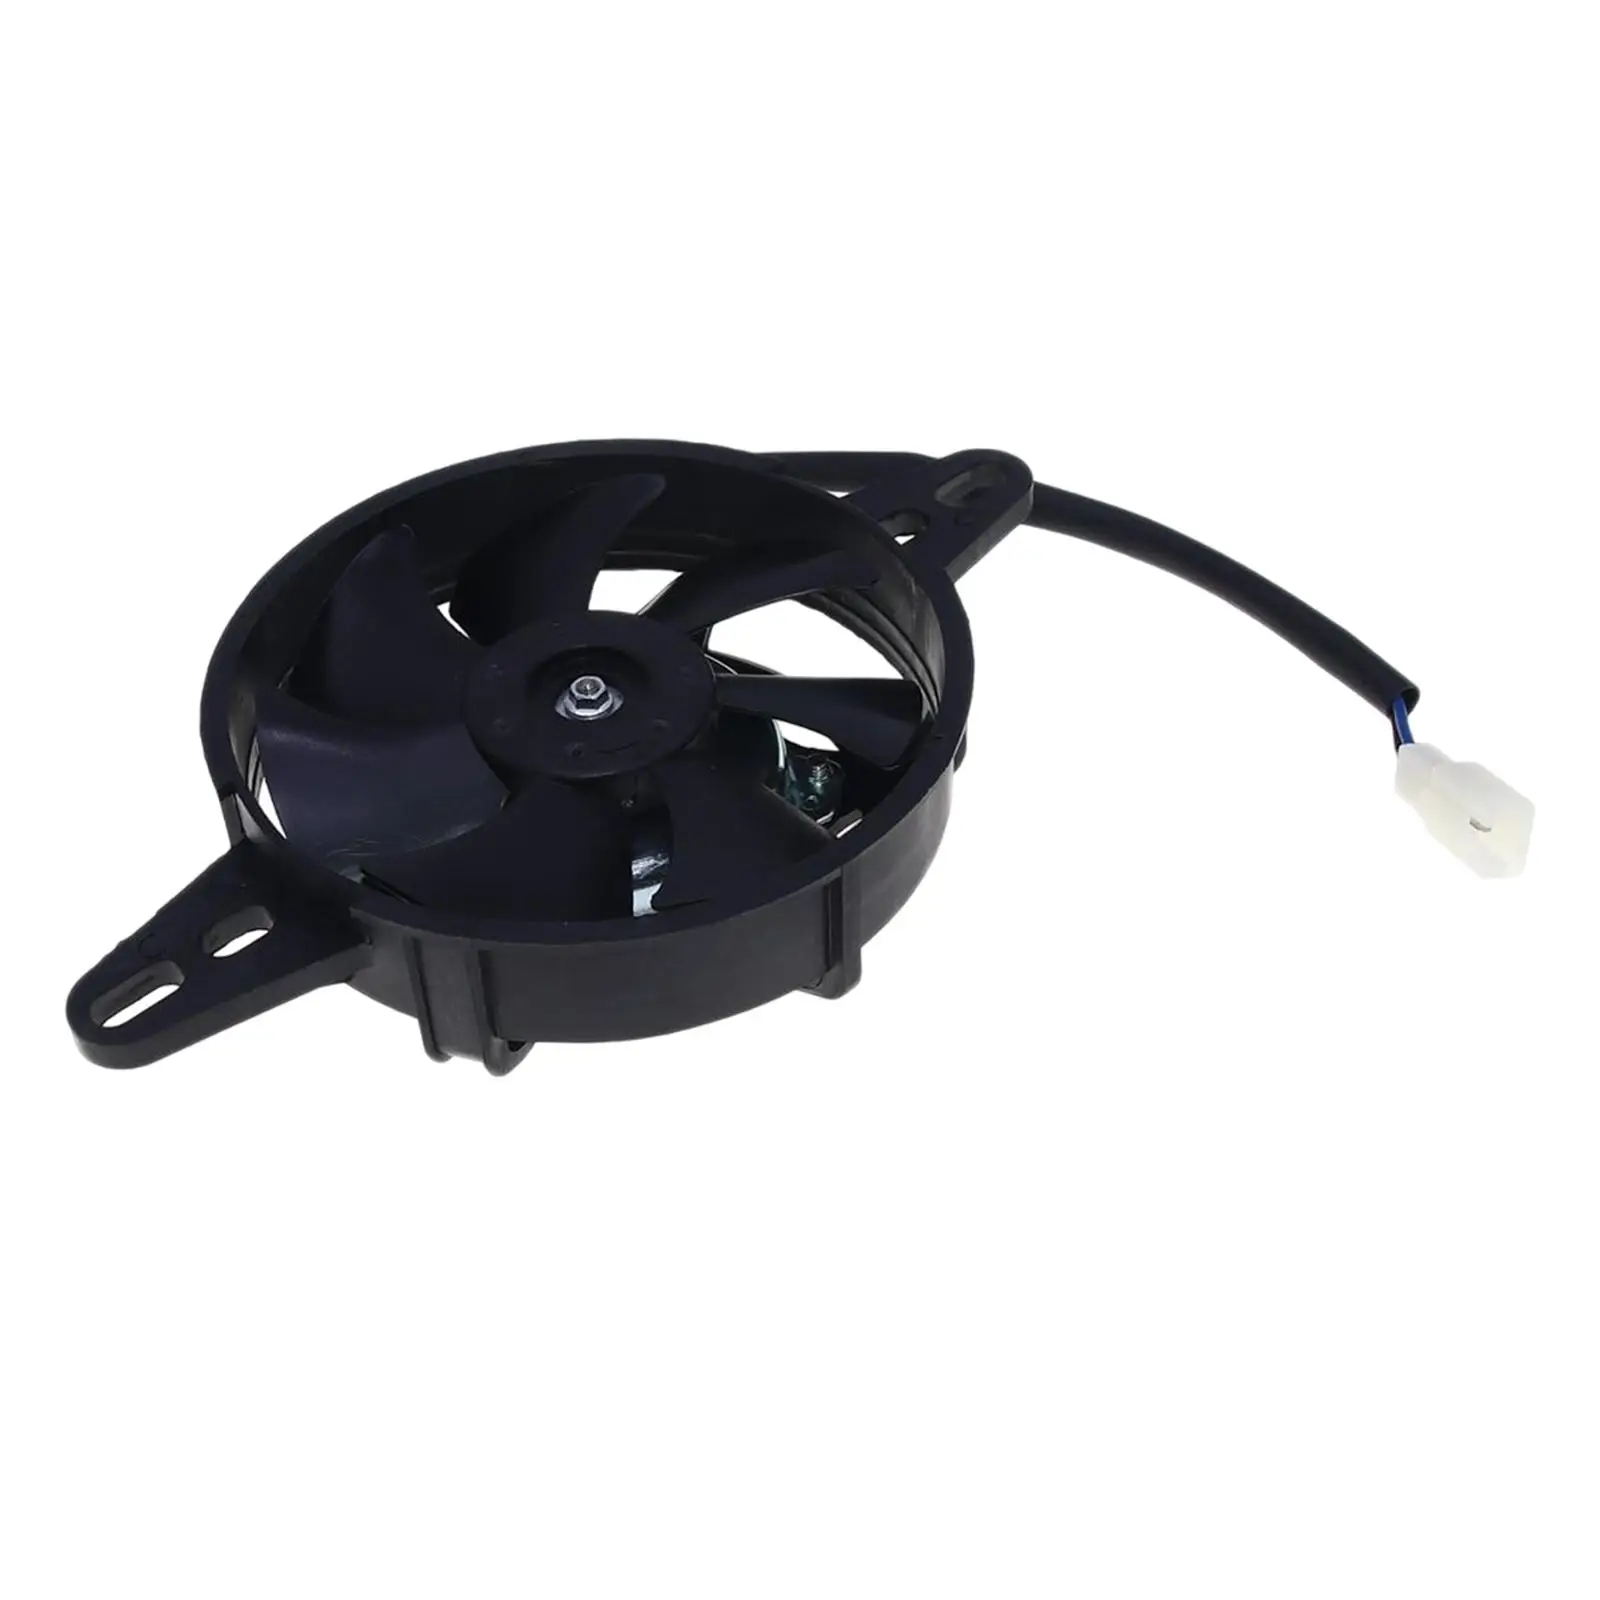 Motorcycle Radiator Cooling Fan Replaces Parts Premium Oil Cooler Water Cooler